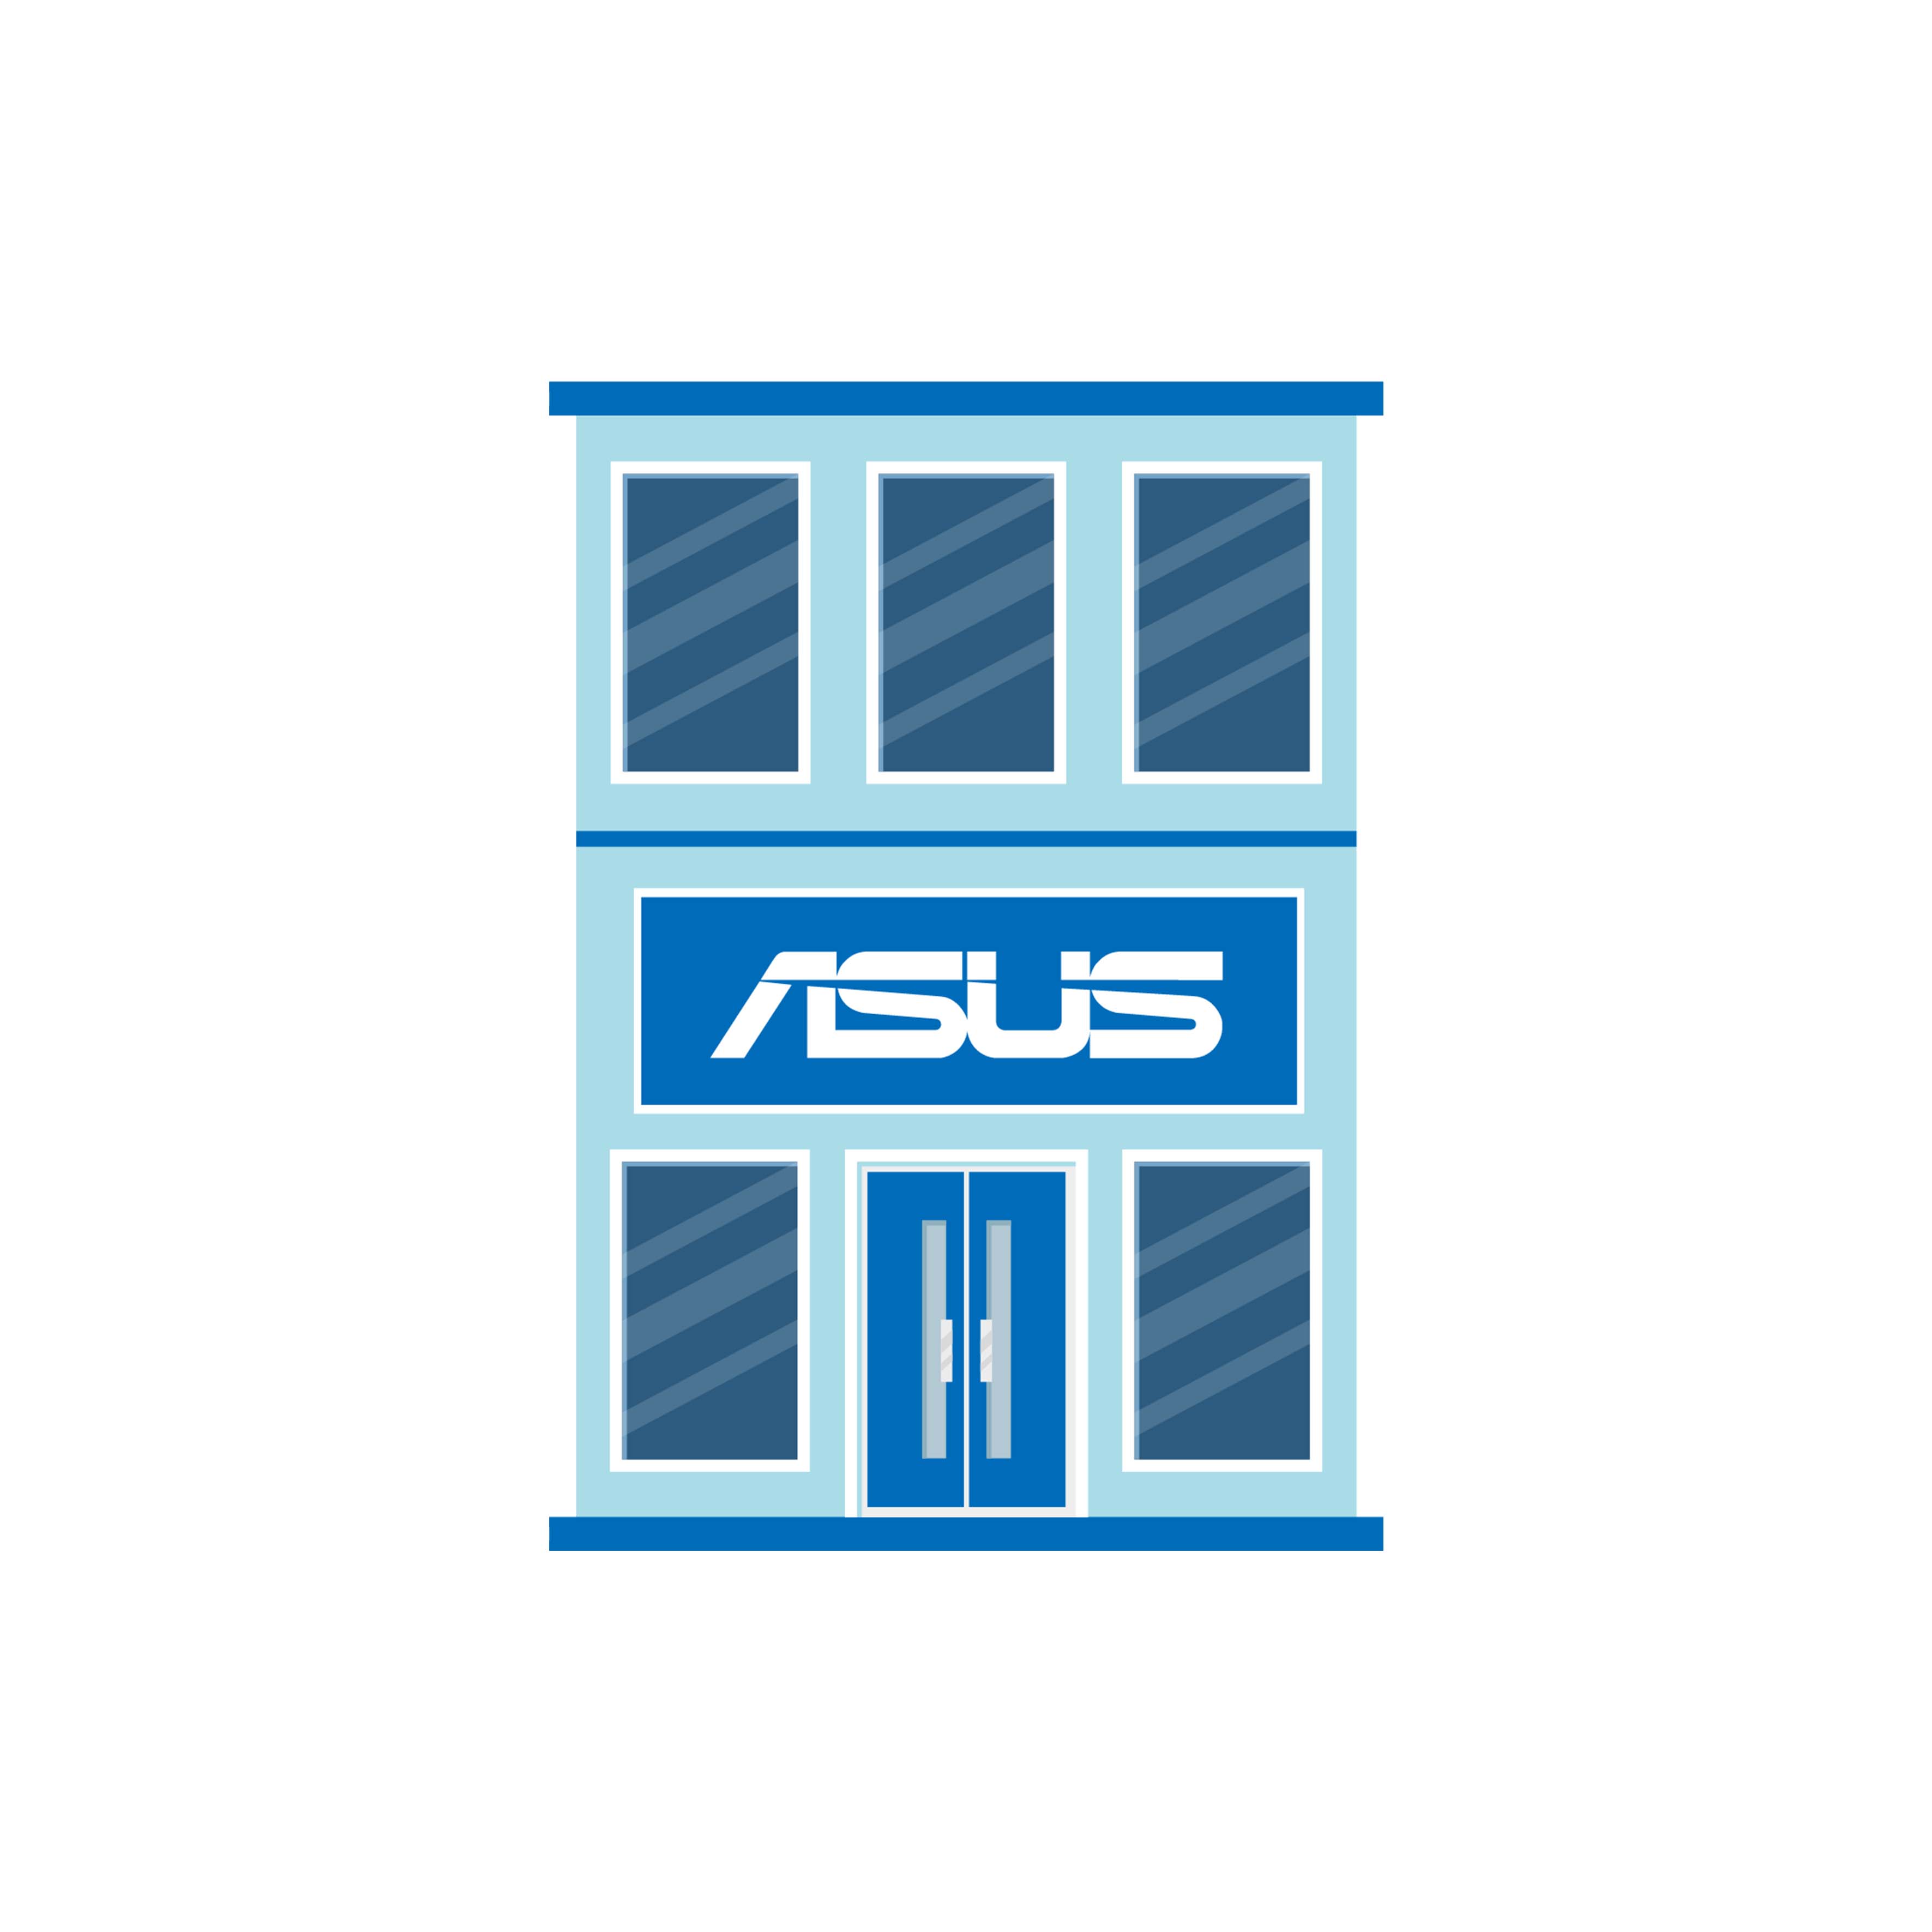 ASUS Store by Agres